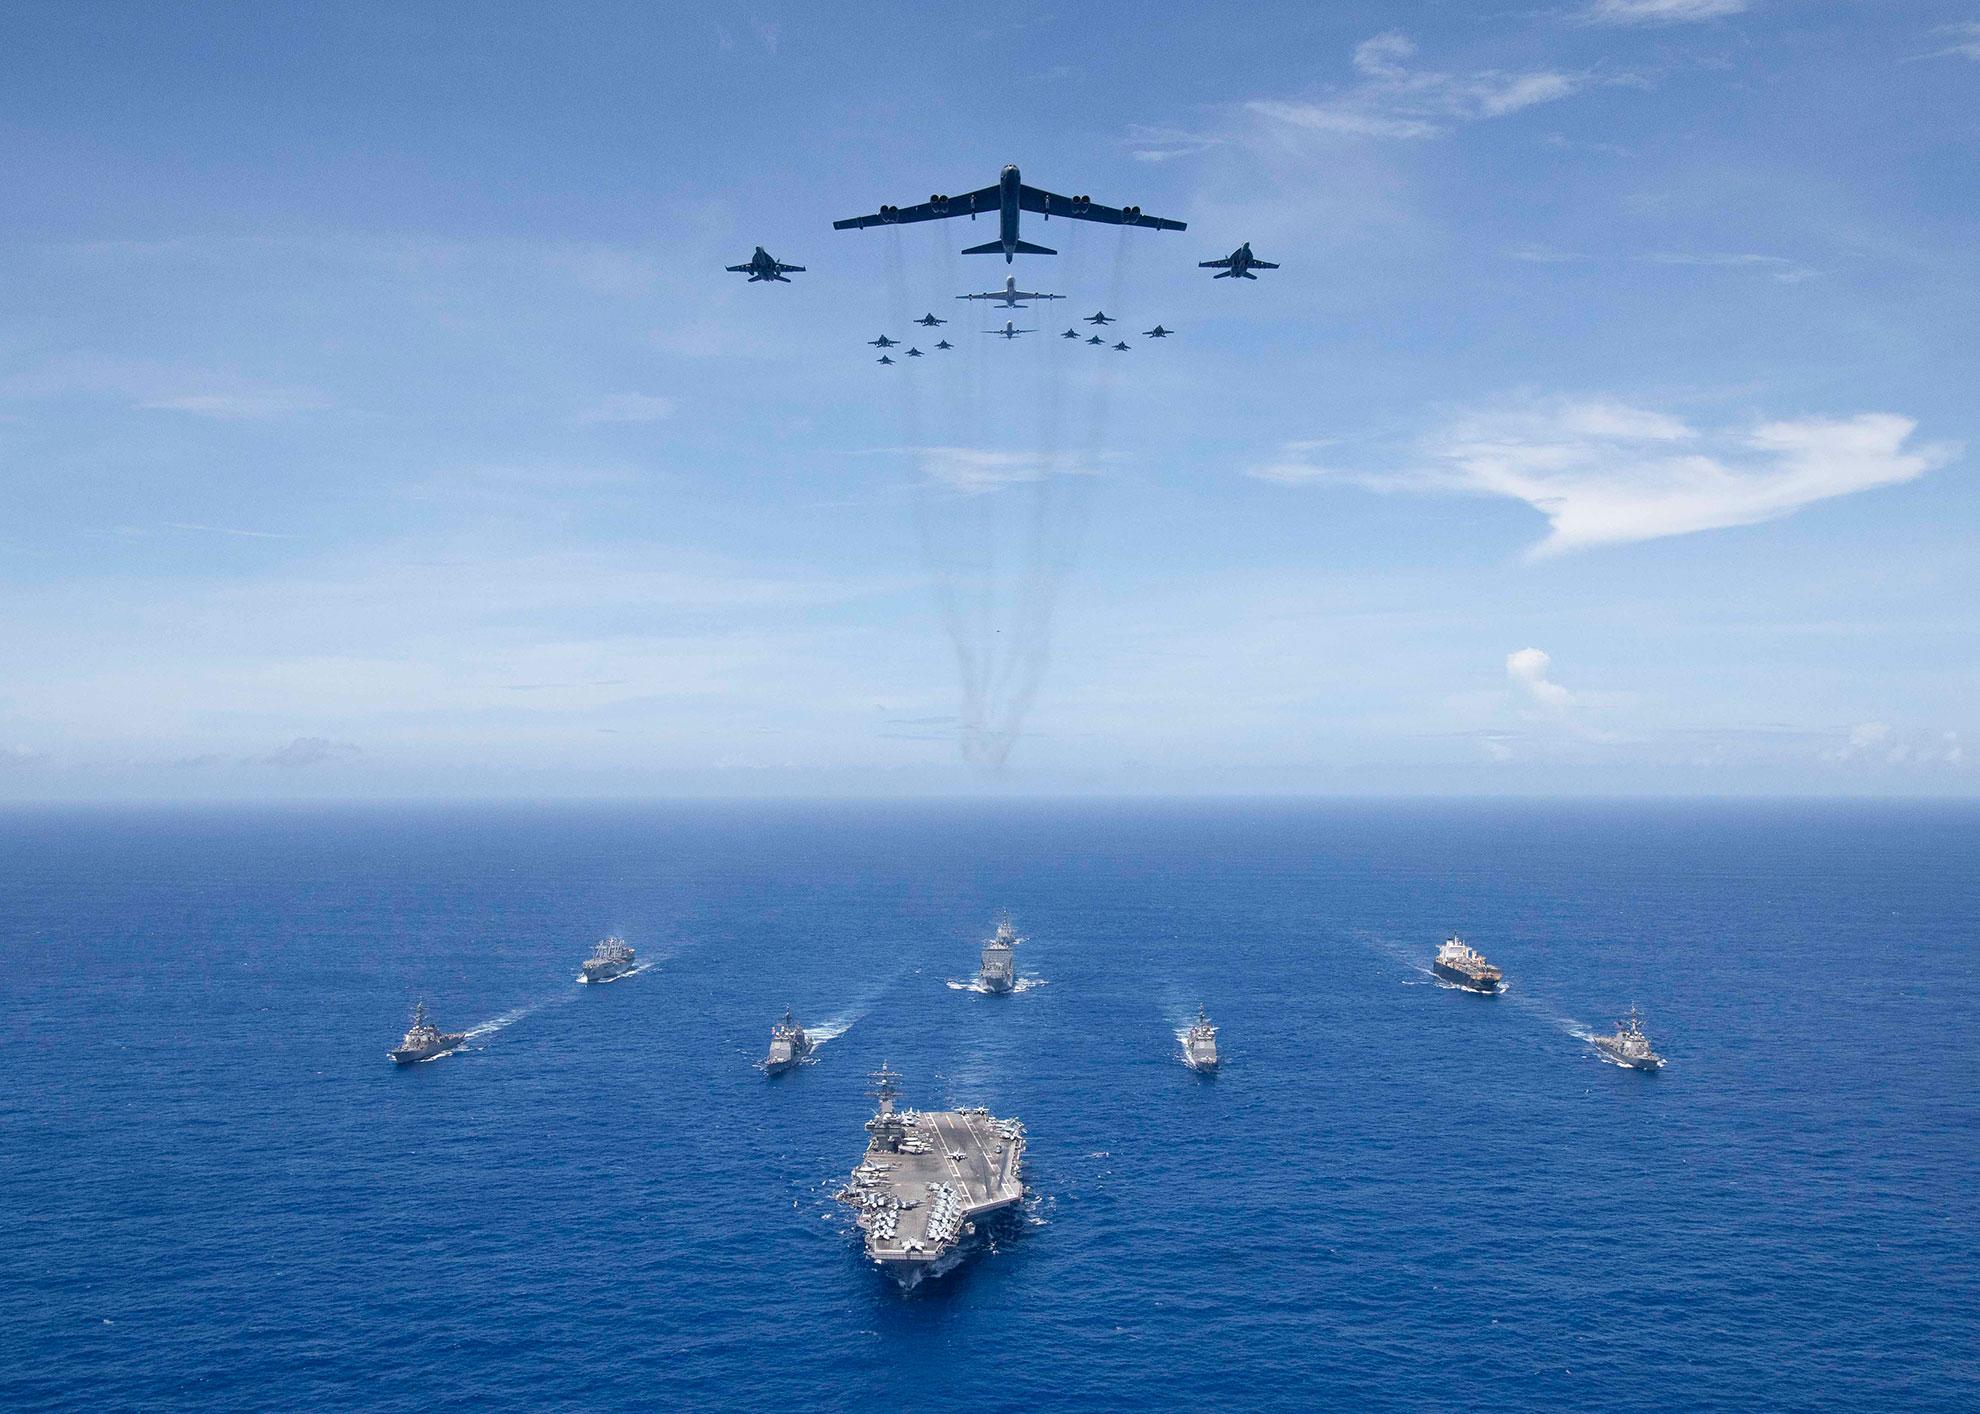 Philippine Sea (Sept. 17, 2018) The aircraft carrier USS Ronald Reagan (CVN 76) leads a formation of Carrier Strike Group (CSG) 5 ships as U.S. Air Force B-52 Stratofortress aircraft and U.S. Navy F/A-18 Hornets pass overhead for a photo exercise during Valiant Shield 2018. The biennial, U.S. only, field-training exercise focuses on integration of joint training among the U.S. Navy, Air Force and Marine Corps. This is the seventh exercise in the Valiant Shield series that began in 2006 --U.S. Navy photo by MCS3 Erwin Miciano. -